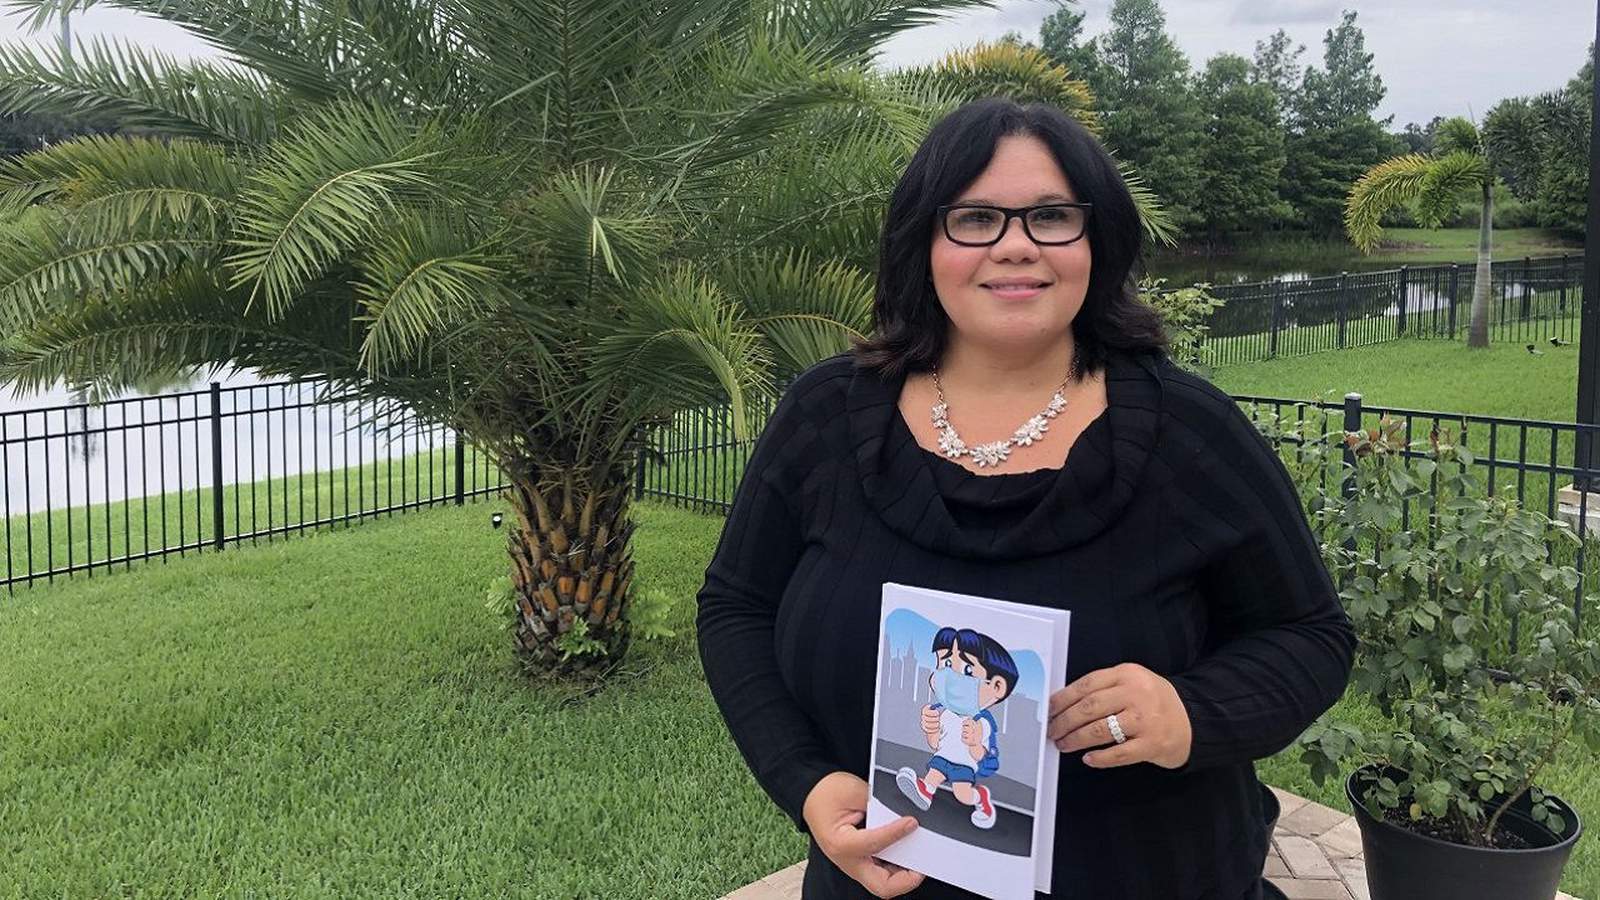 Local author writes children’s book that dives into emotions during COVID-19 pandemic